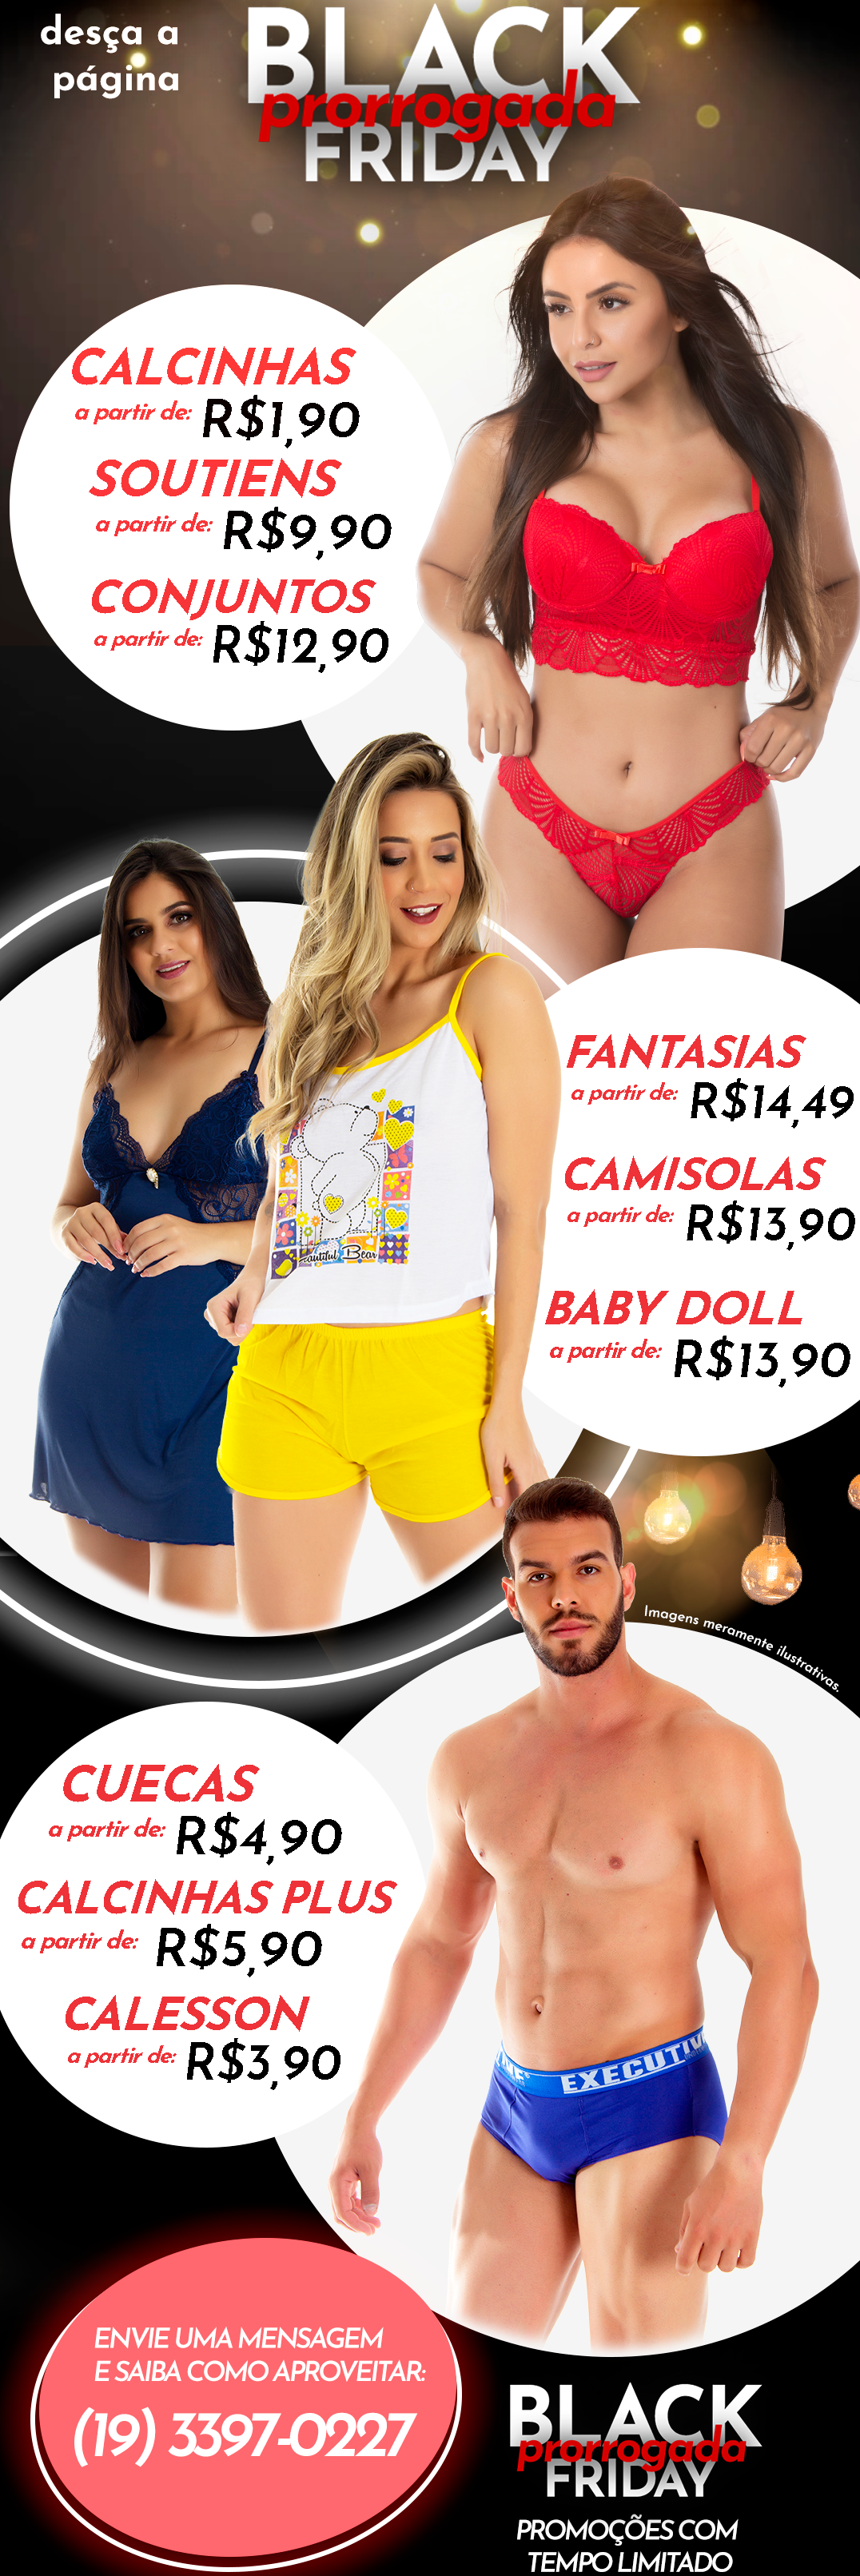 Layout Black Friday Prorrogada 2 - PNG